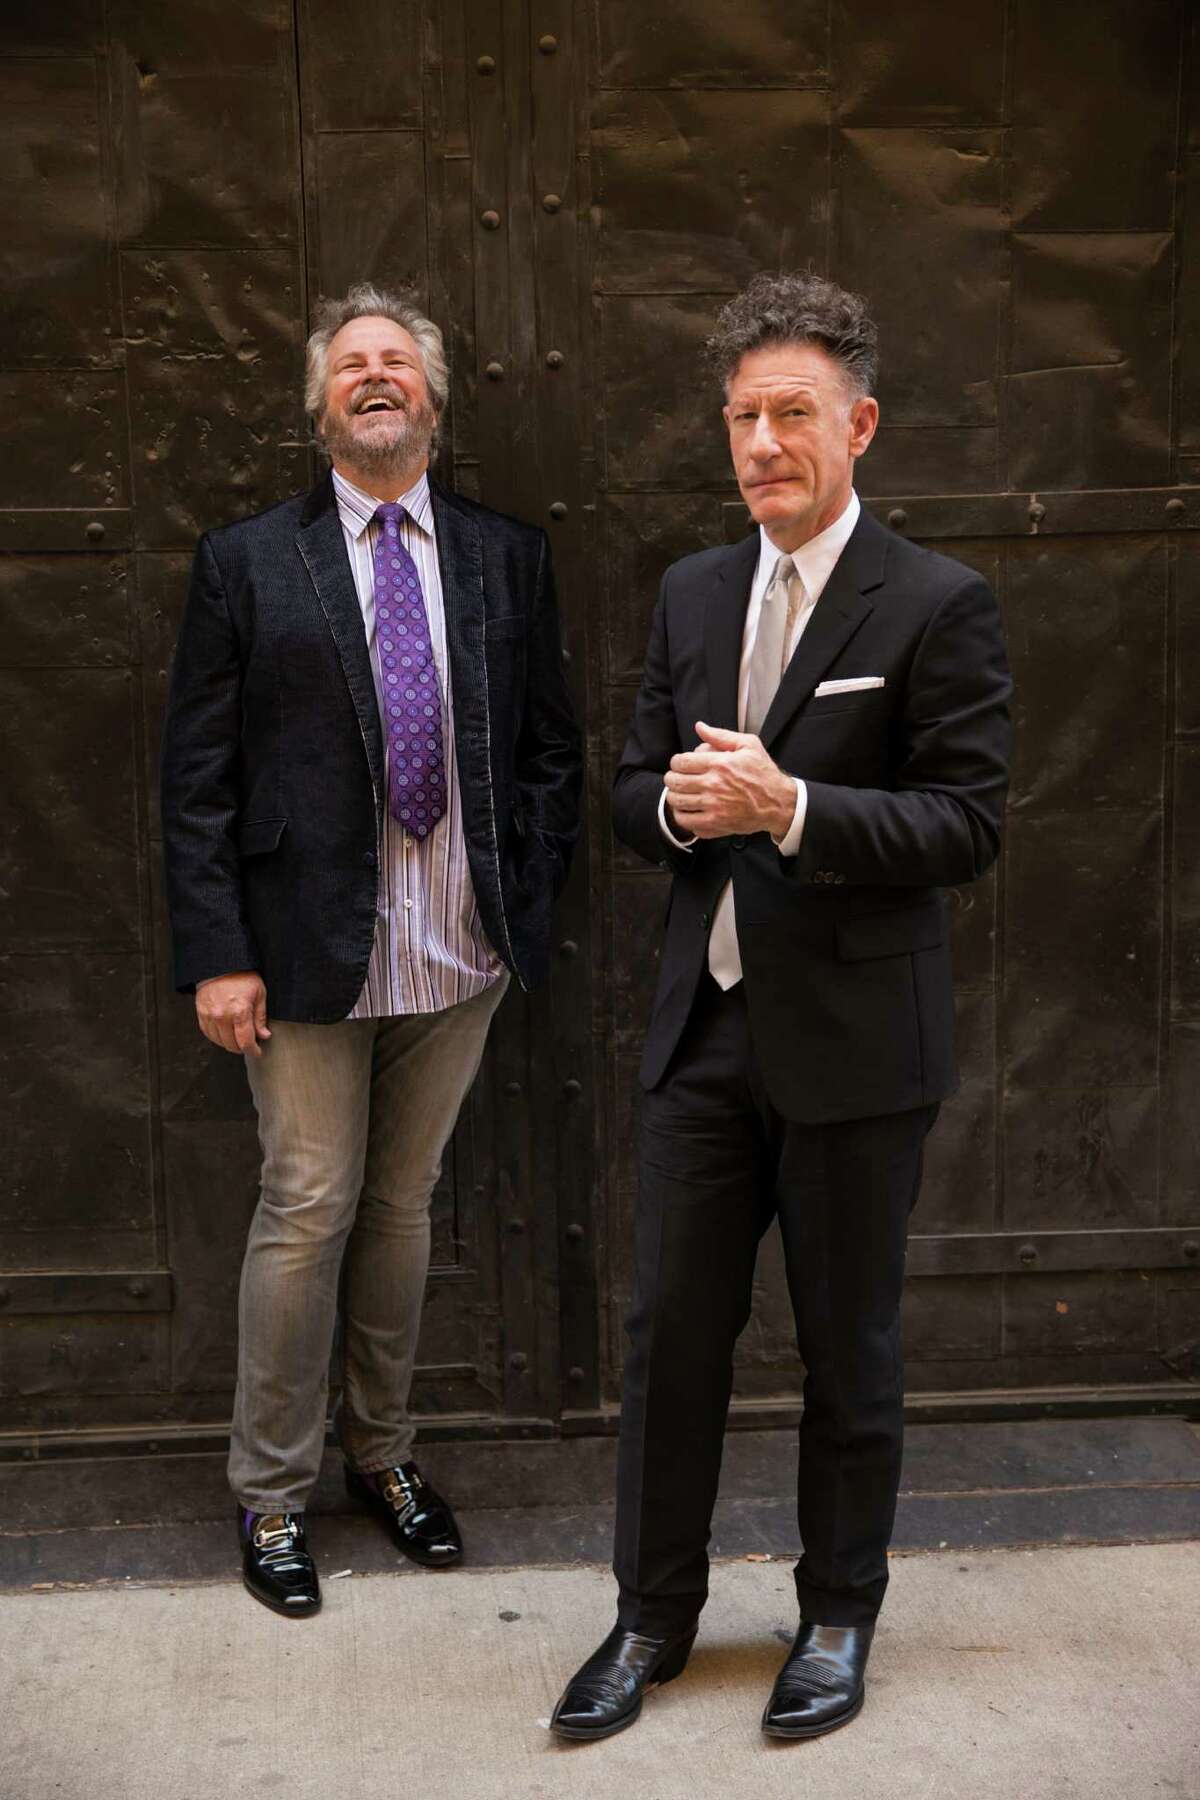 Robert Earl Keen, left, and Lyle Lovett, both from the Houston area, will perform at the Cynthia Woods Mitchell Pavilion on Thursday.